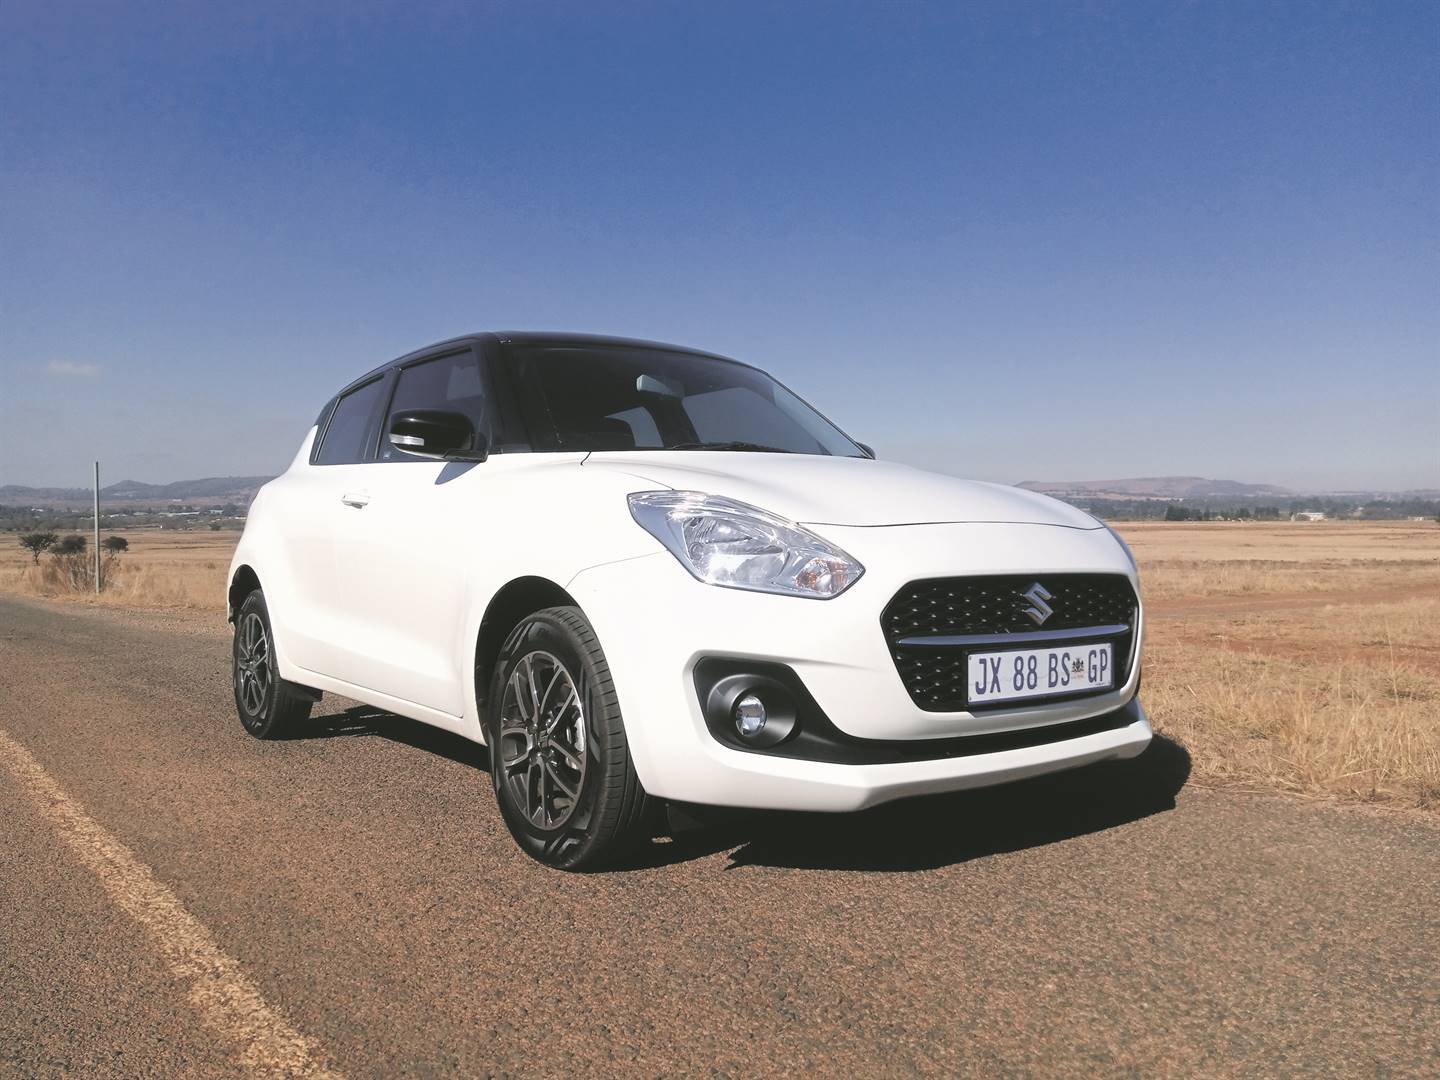 Suzuki Swift is a nice little car, but don't let looks confuse you, it’s not a sport car.                              Photos by Njabulo Ngcobo